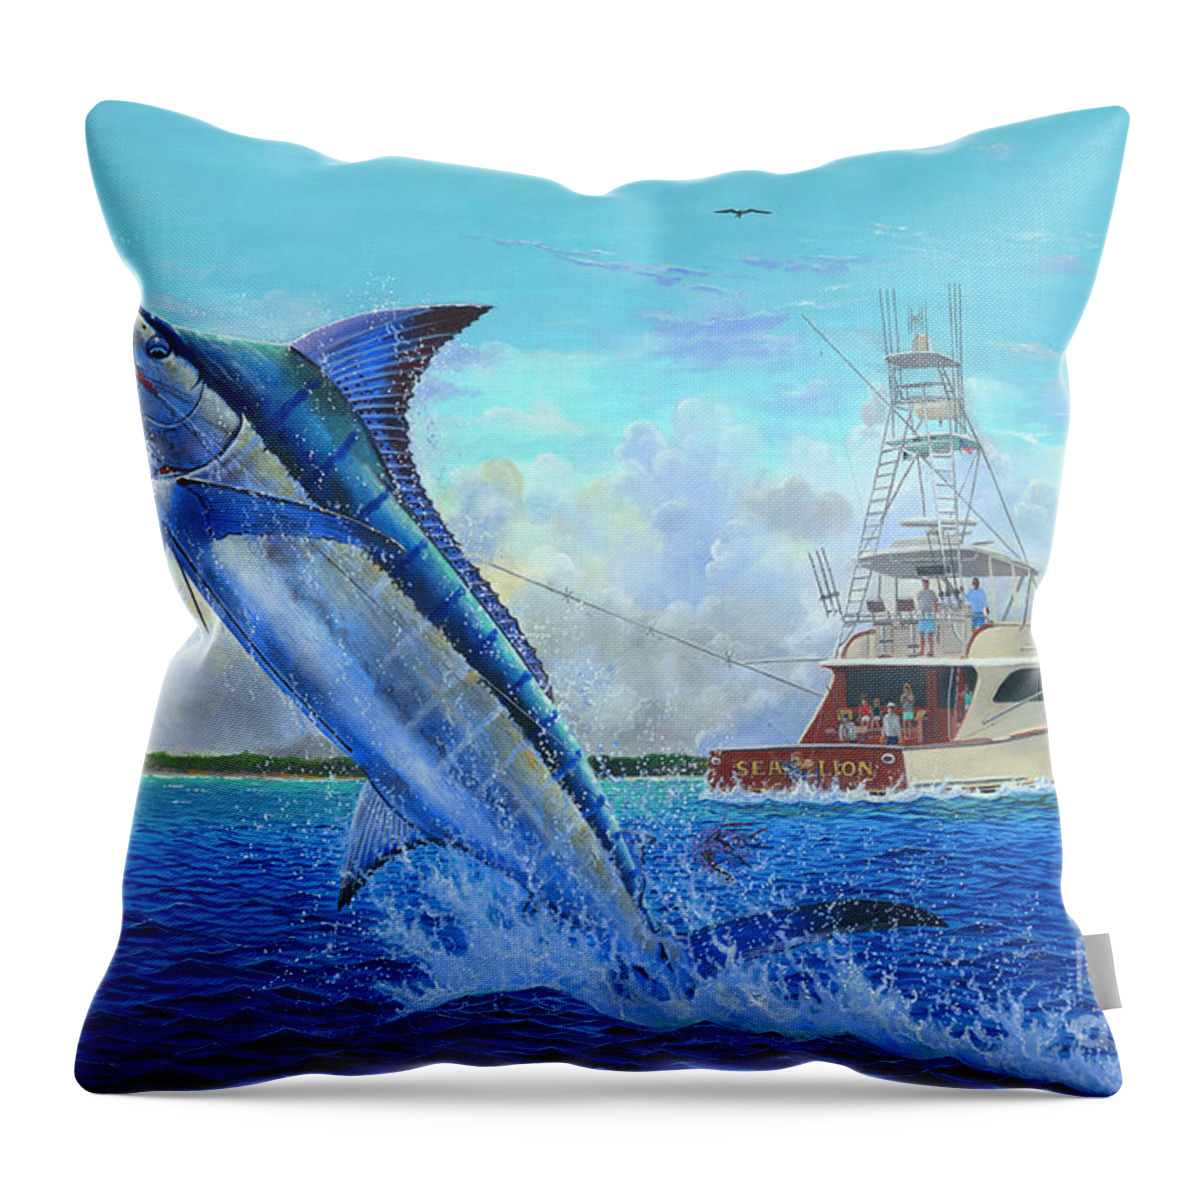 Marlin Throw Pillow featuring the painting Sea Lion by Carey Chen